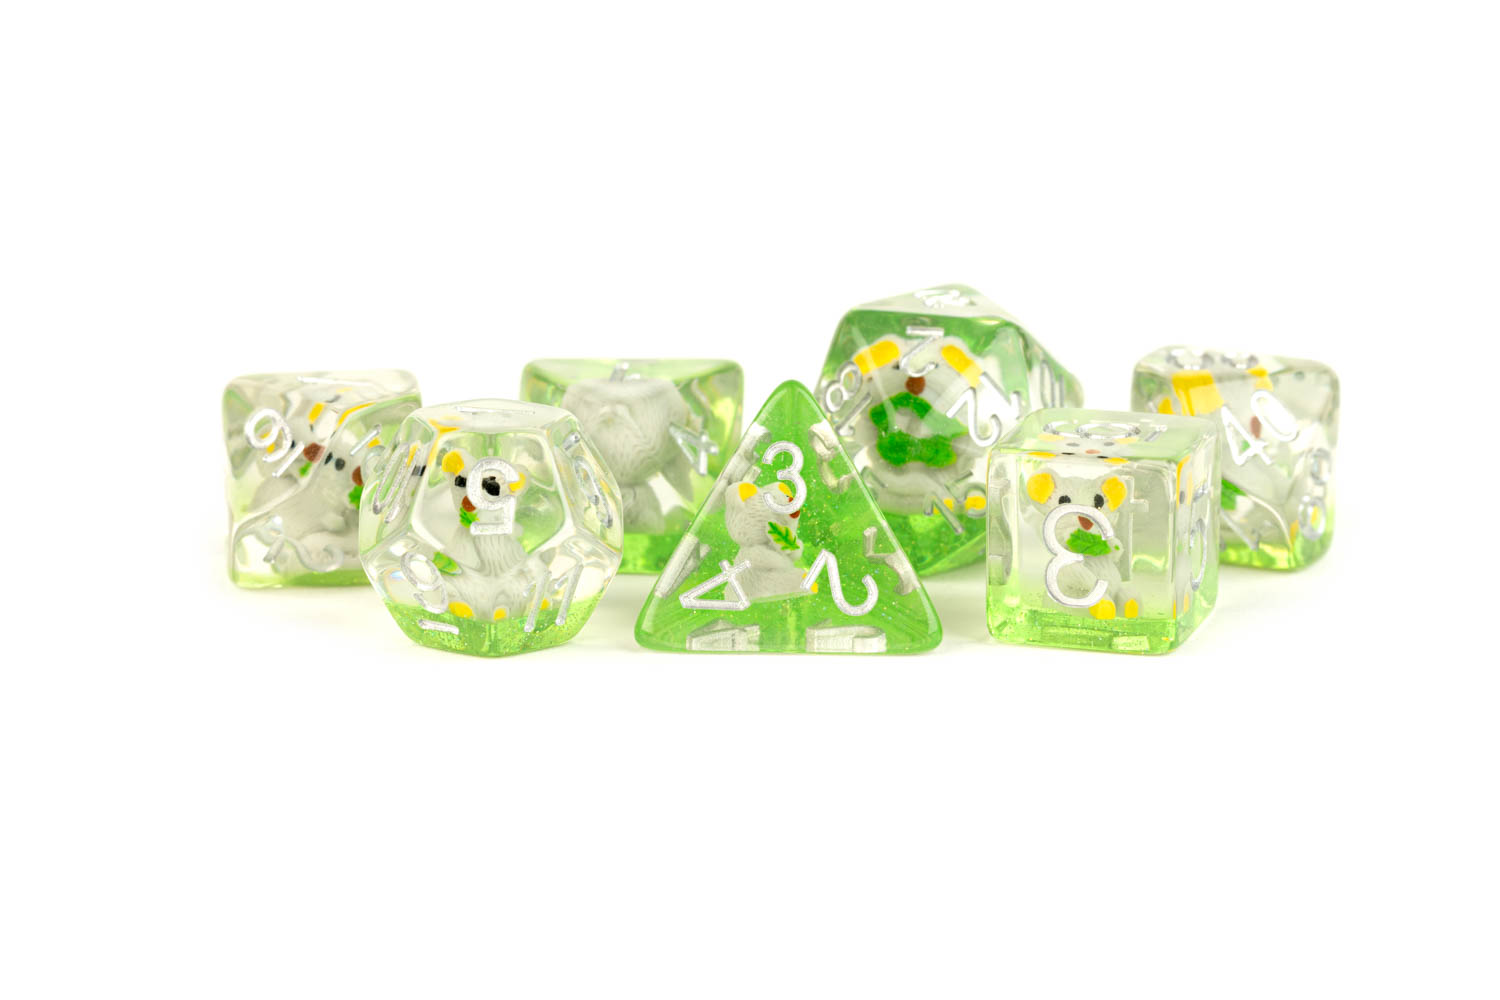 Clear dice set with Koala figures and white numbers